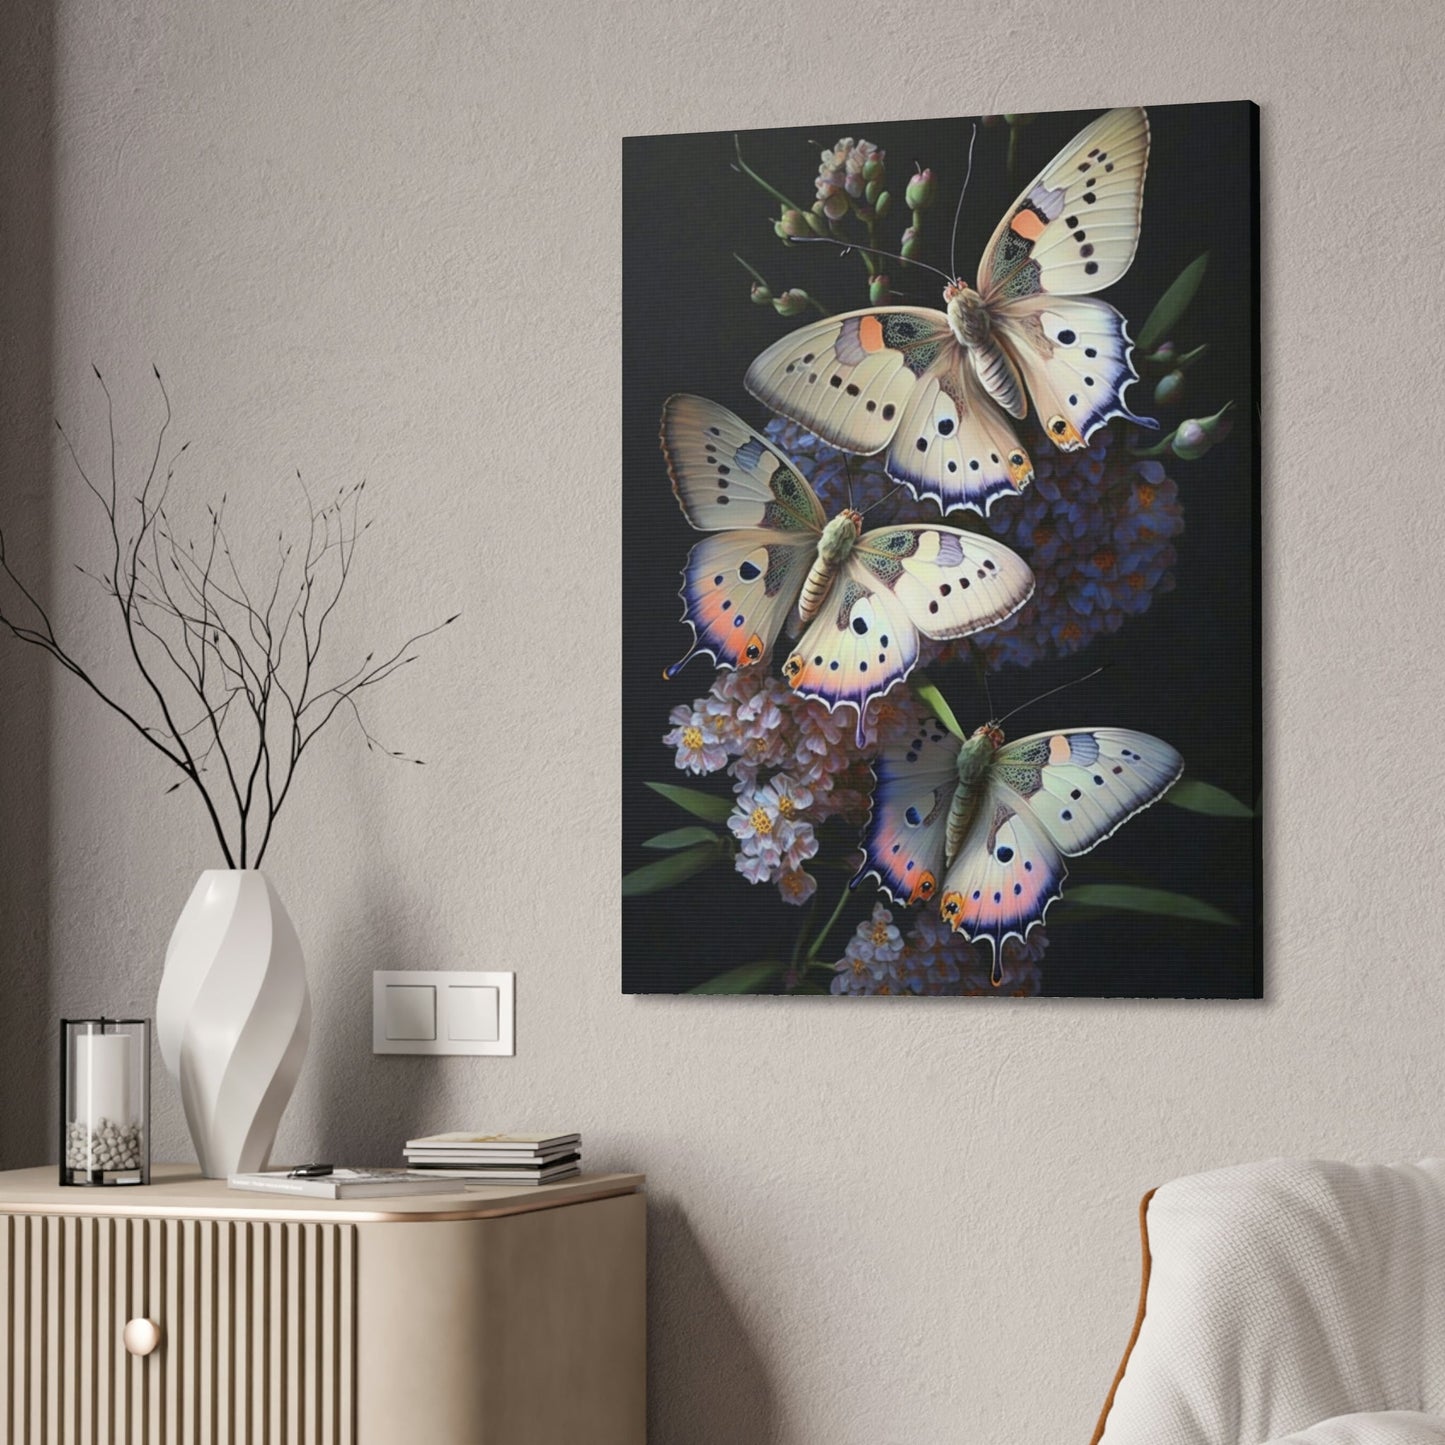 Butterflies on a Summer Day: Canvas Wall Art Print of Insects in Warm Sunlight